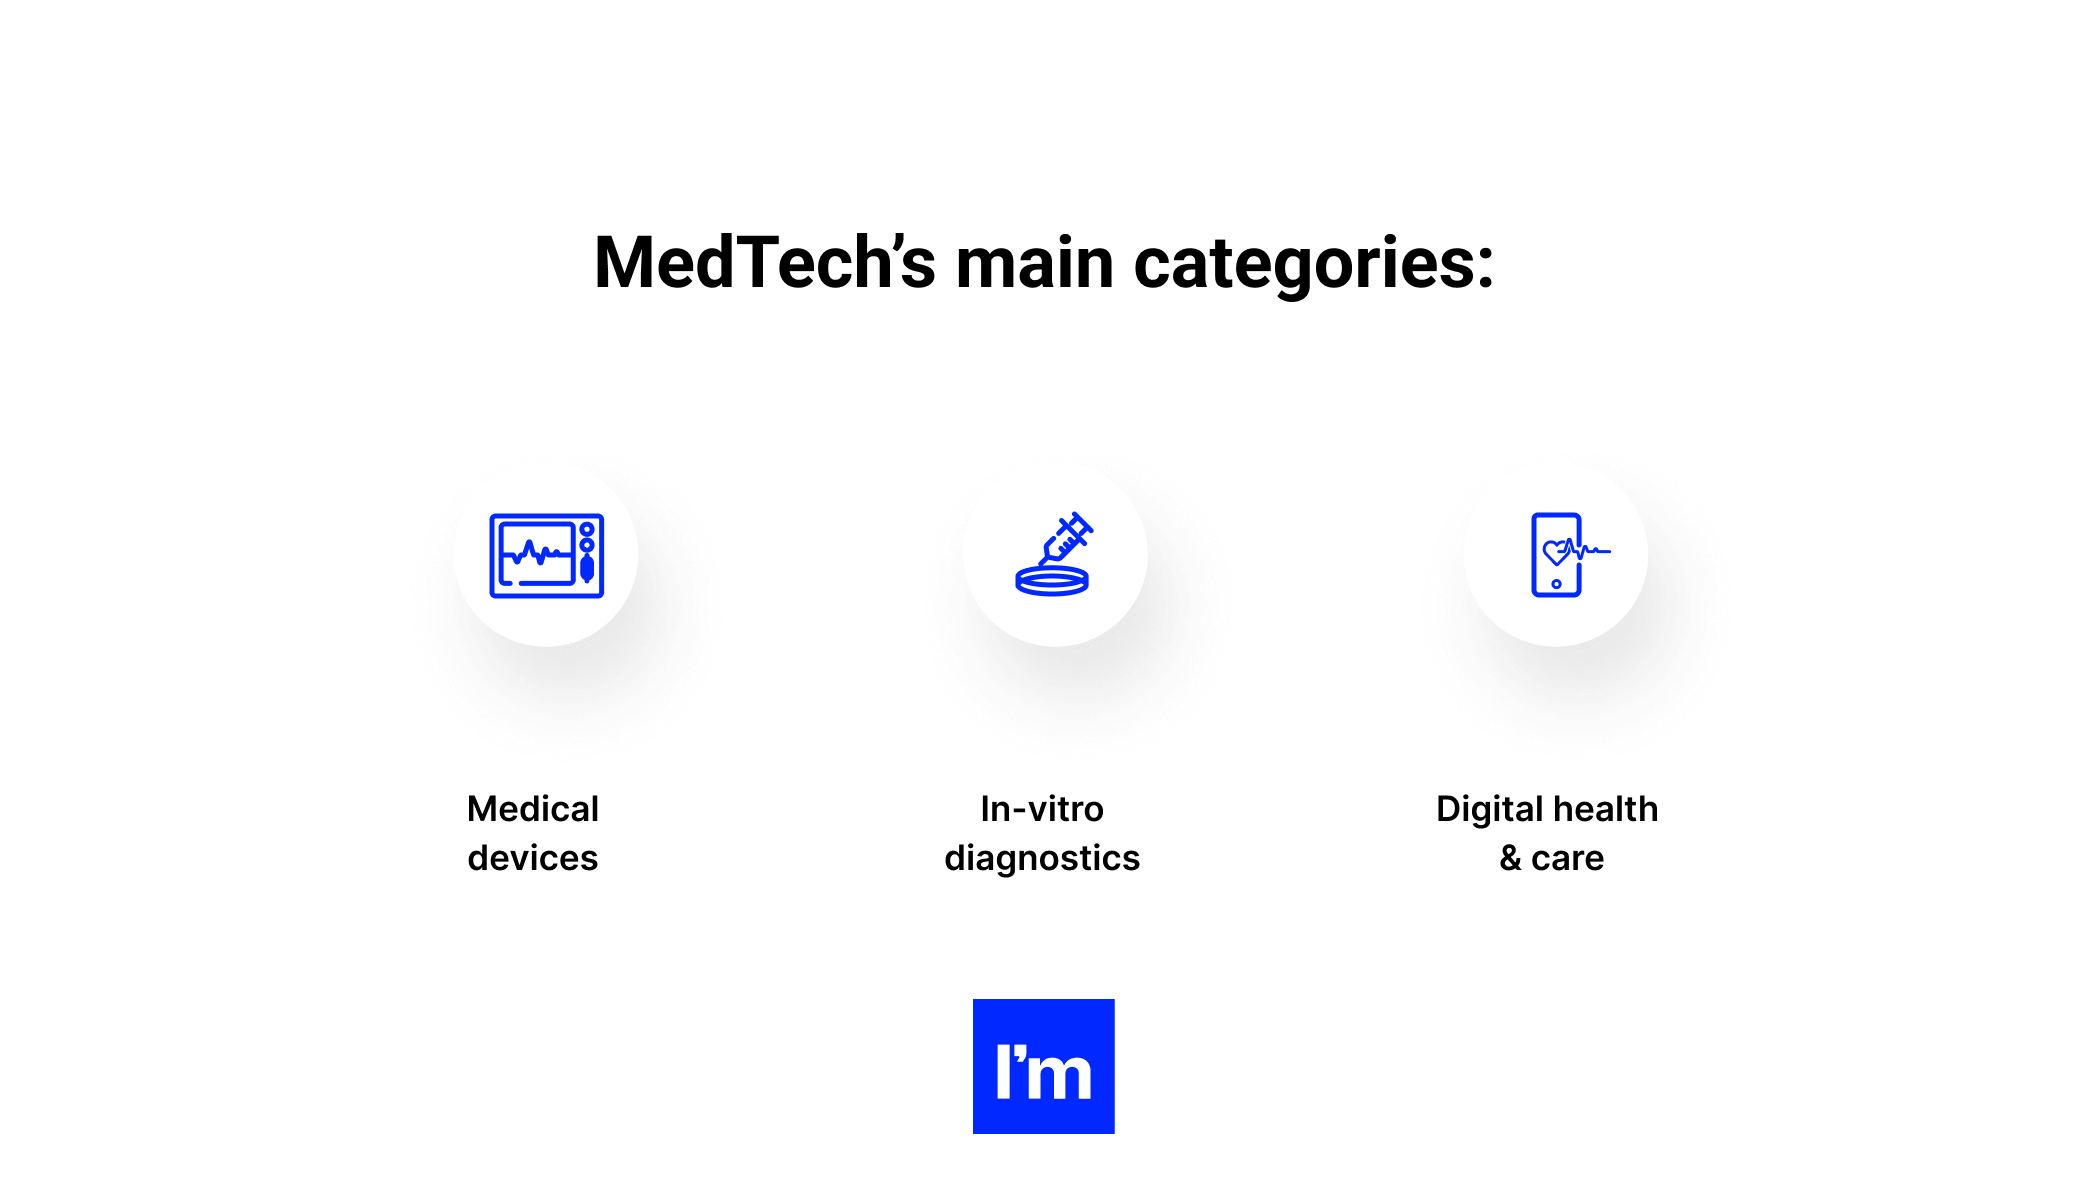 Your Starter Guide to Developing a Winning MedTech Software Product - medtech main categories